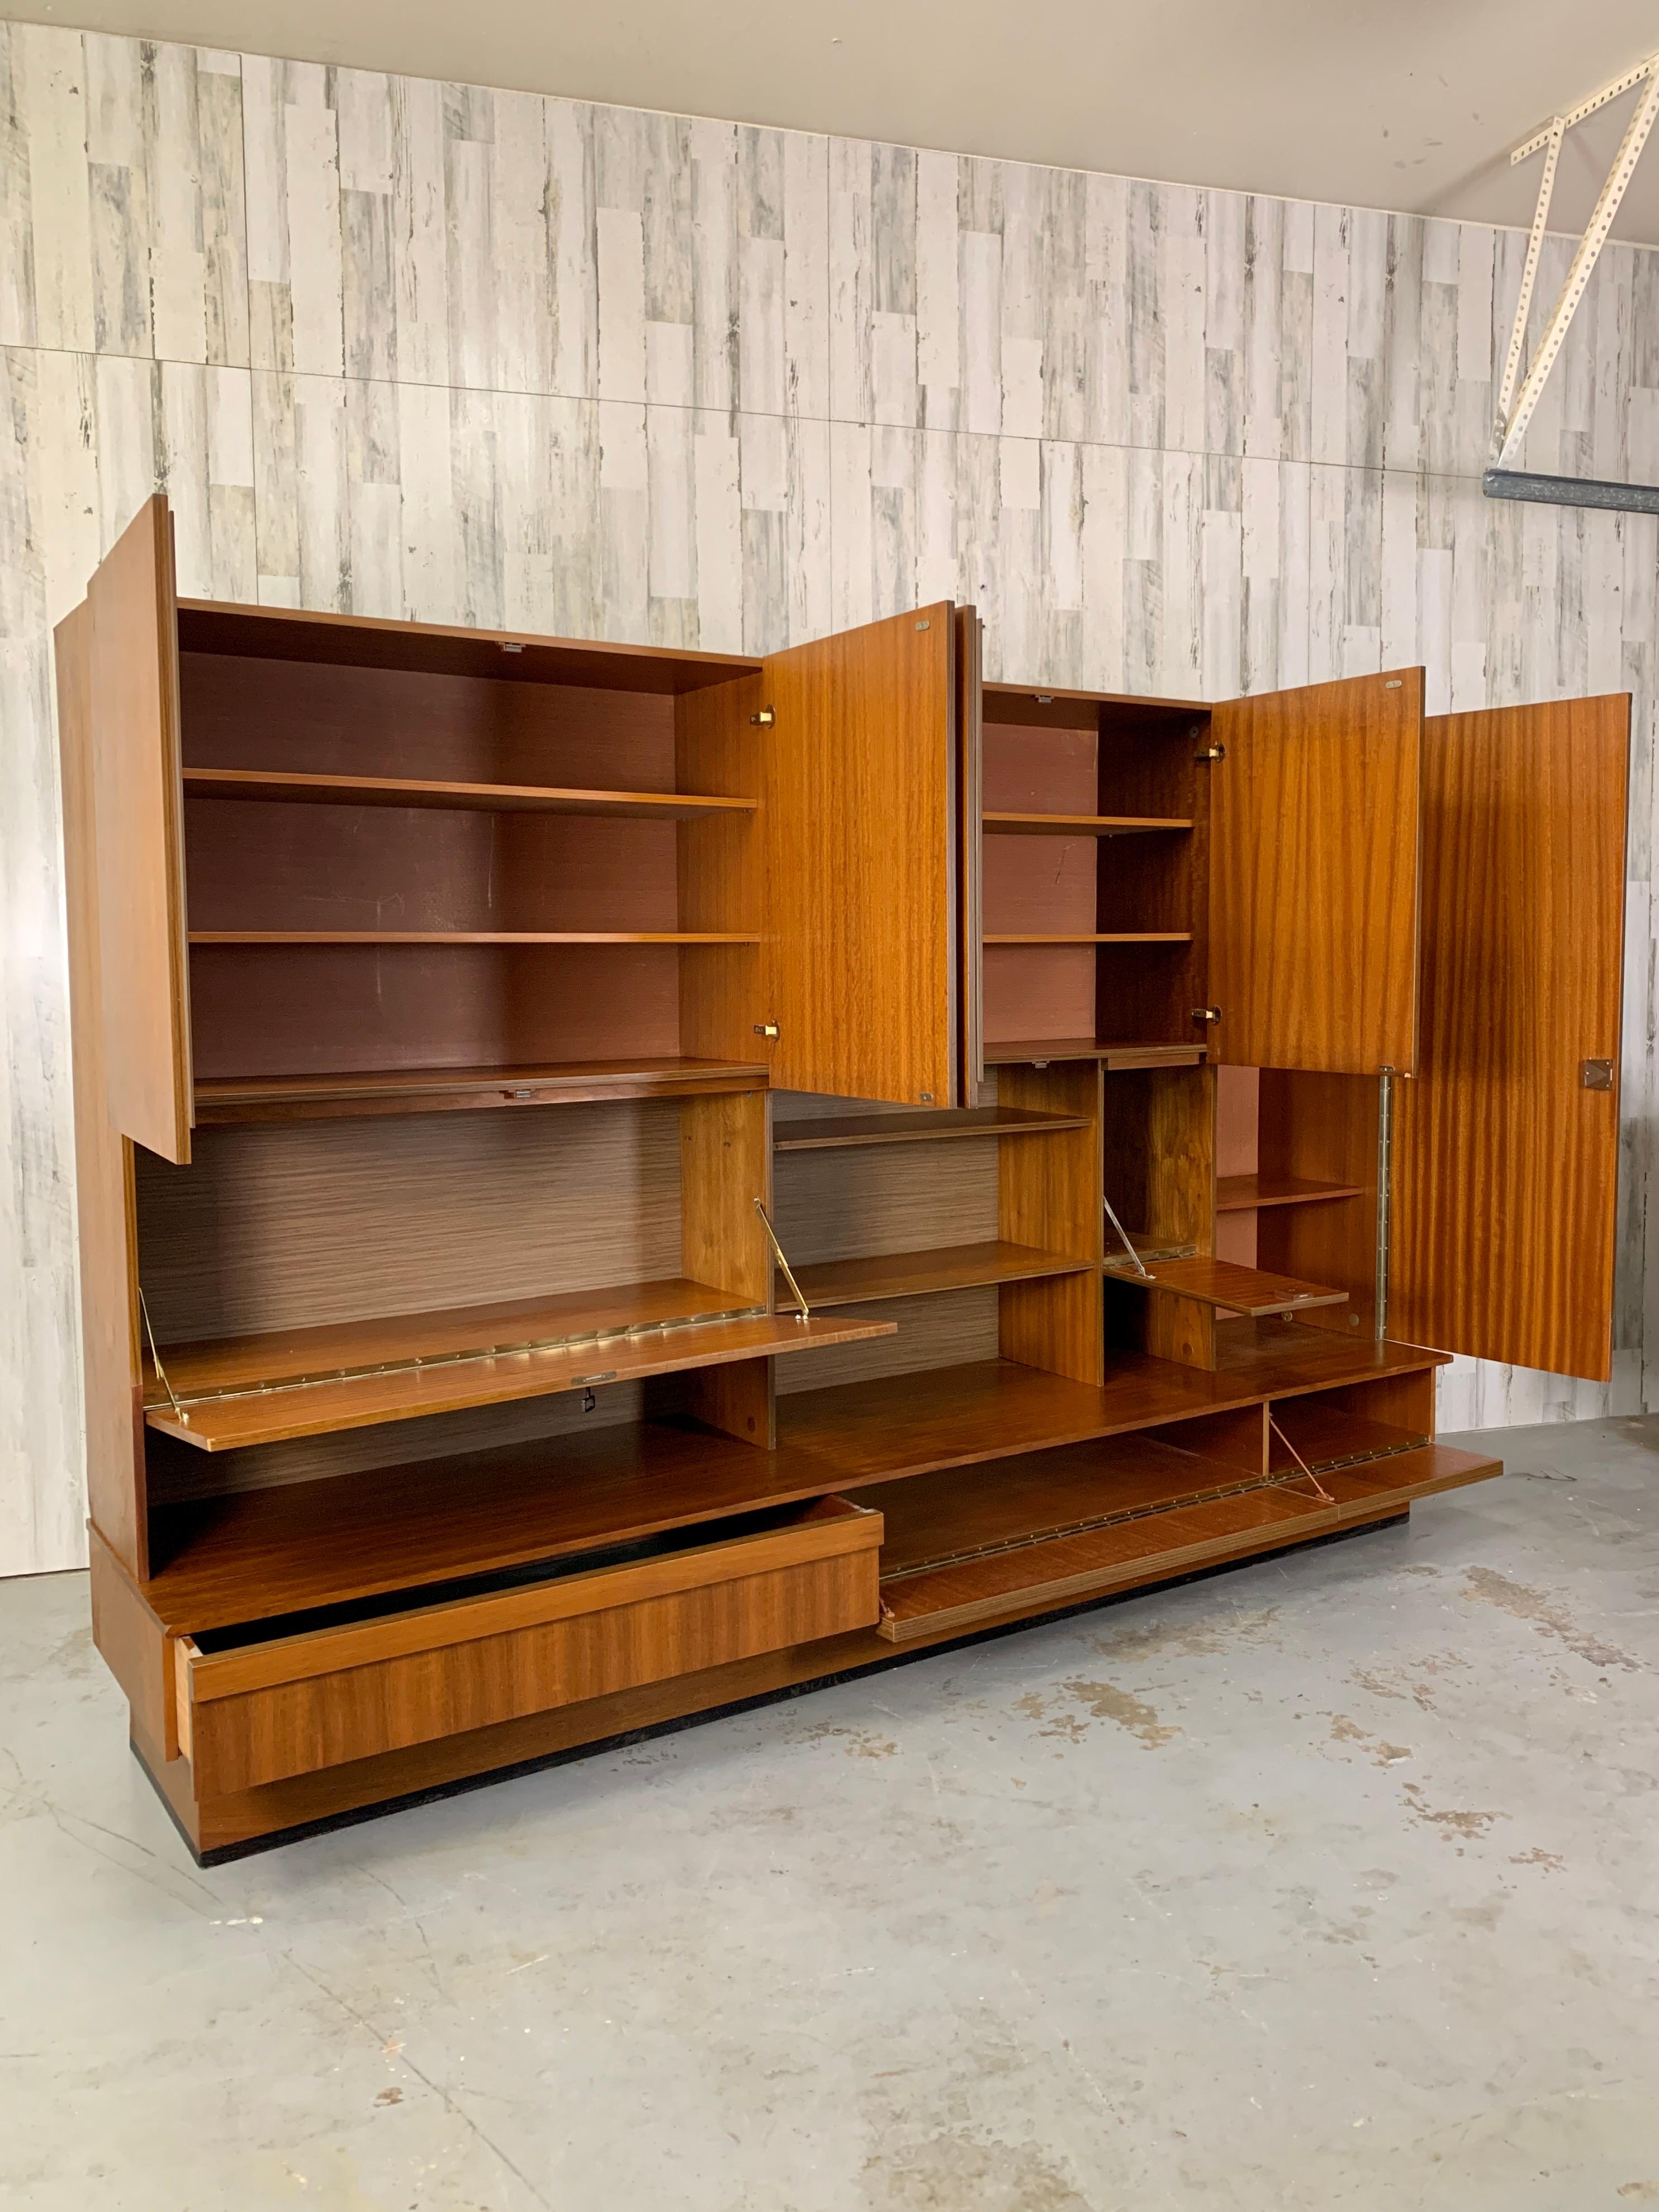 Large Mid-Century Modern German wall unit with multiple compartments and shelving. Base has pull down doors as well as one drawer. Contains 3 locked compartments of varying size. Would make a great bar cabinet or entertainment center.